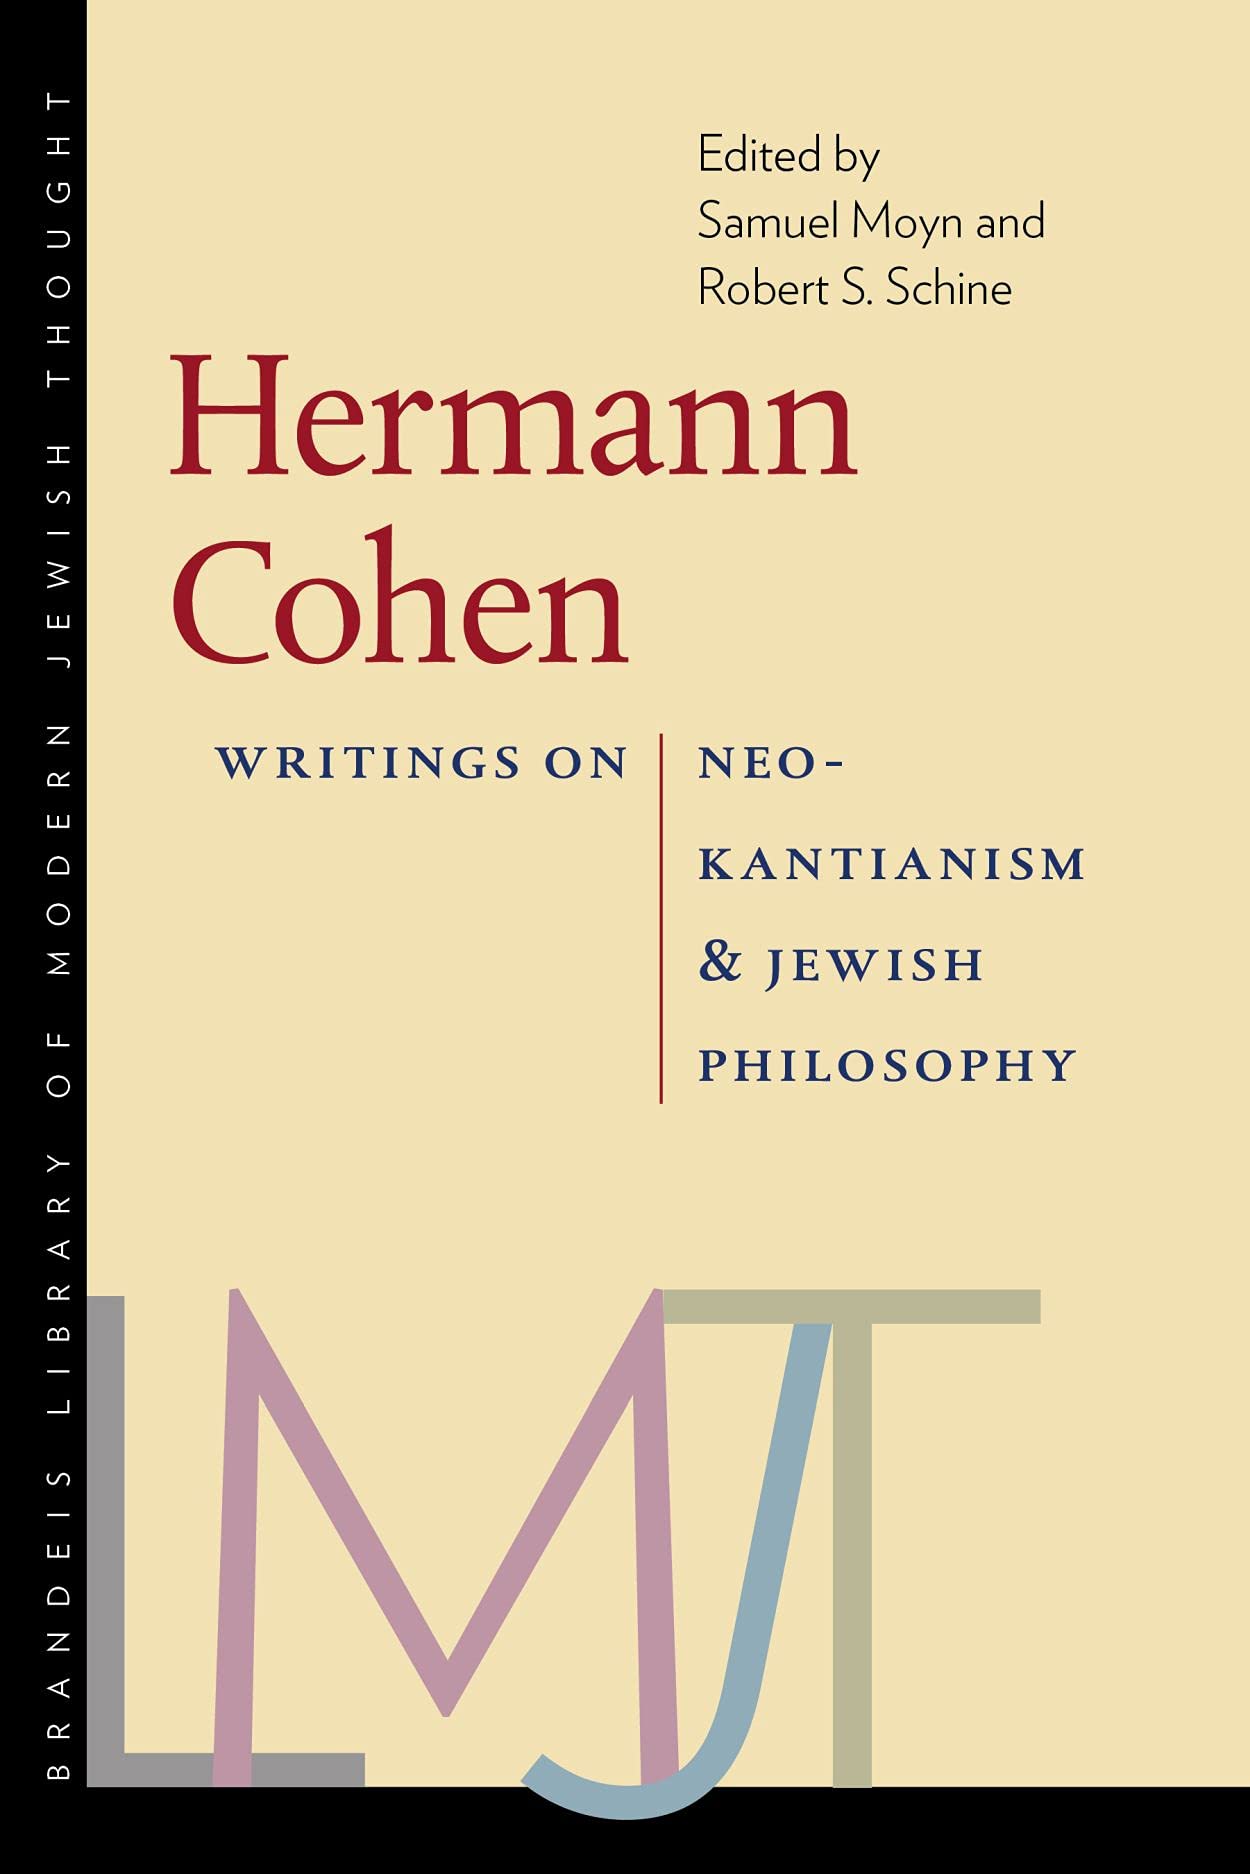 Writings on Neo-Kantianism and Jewish Philosophy